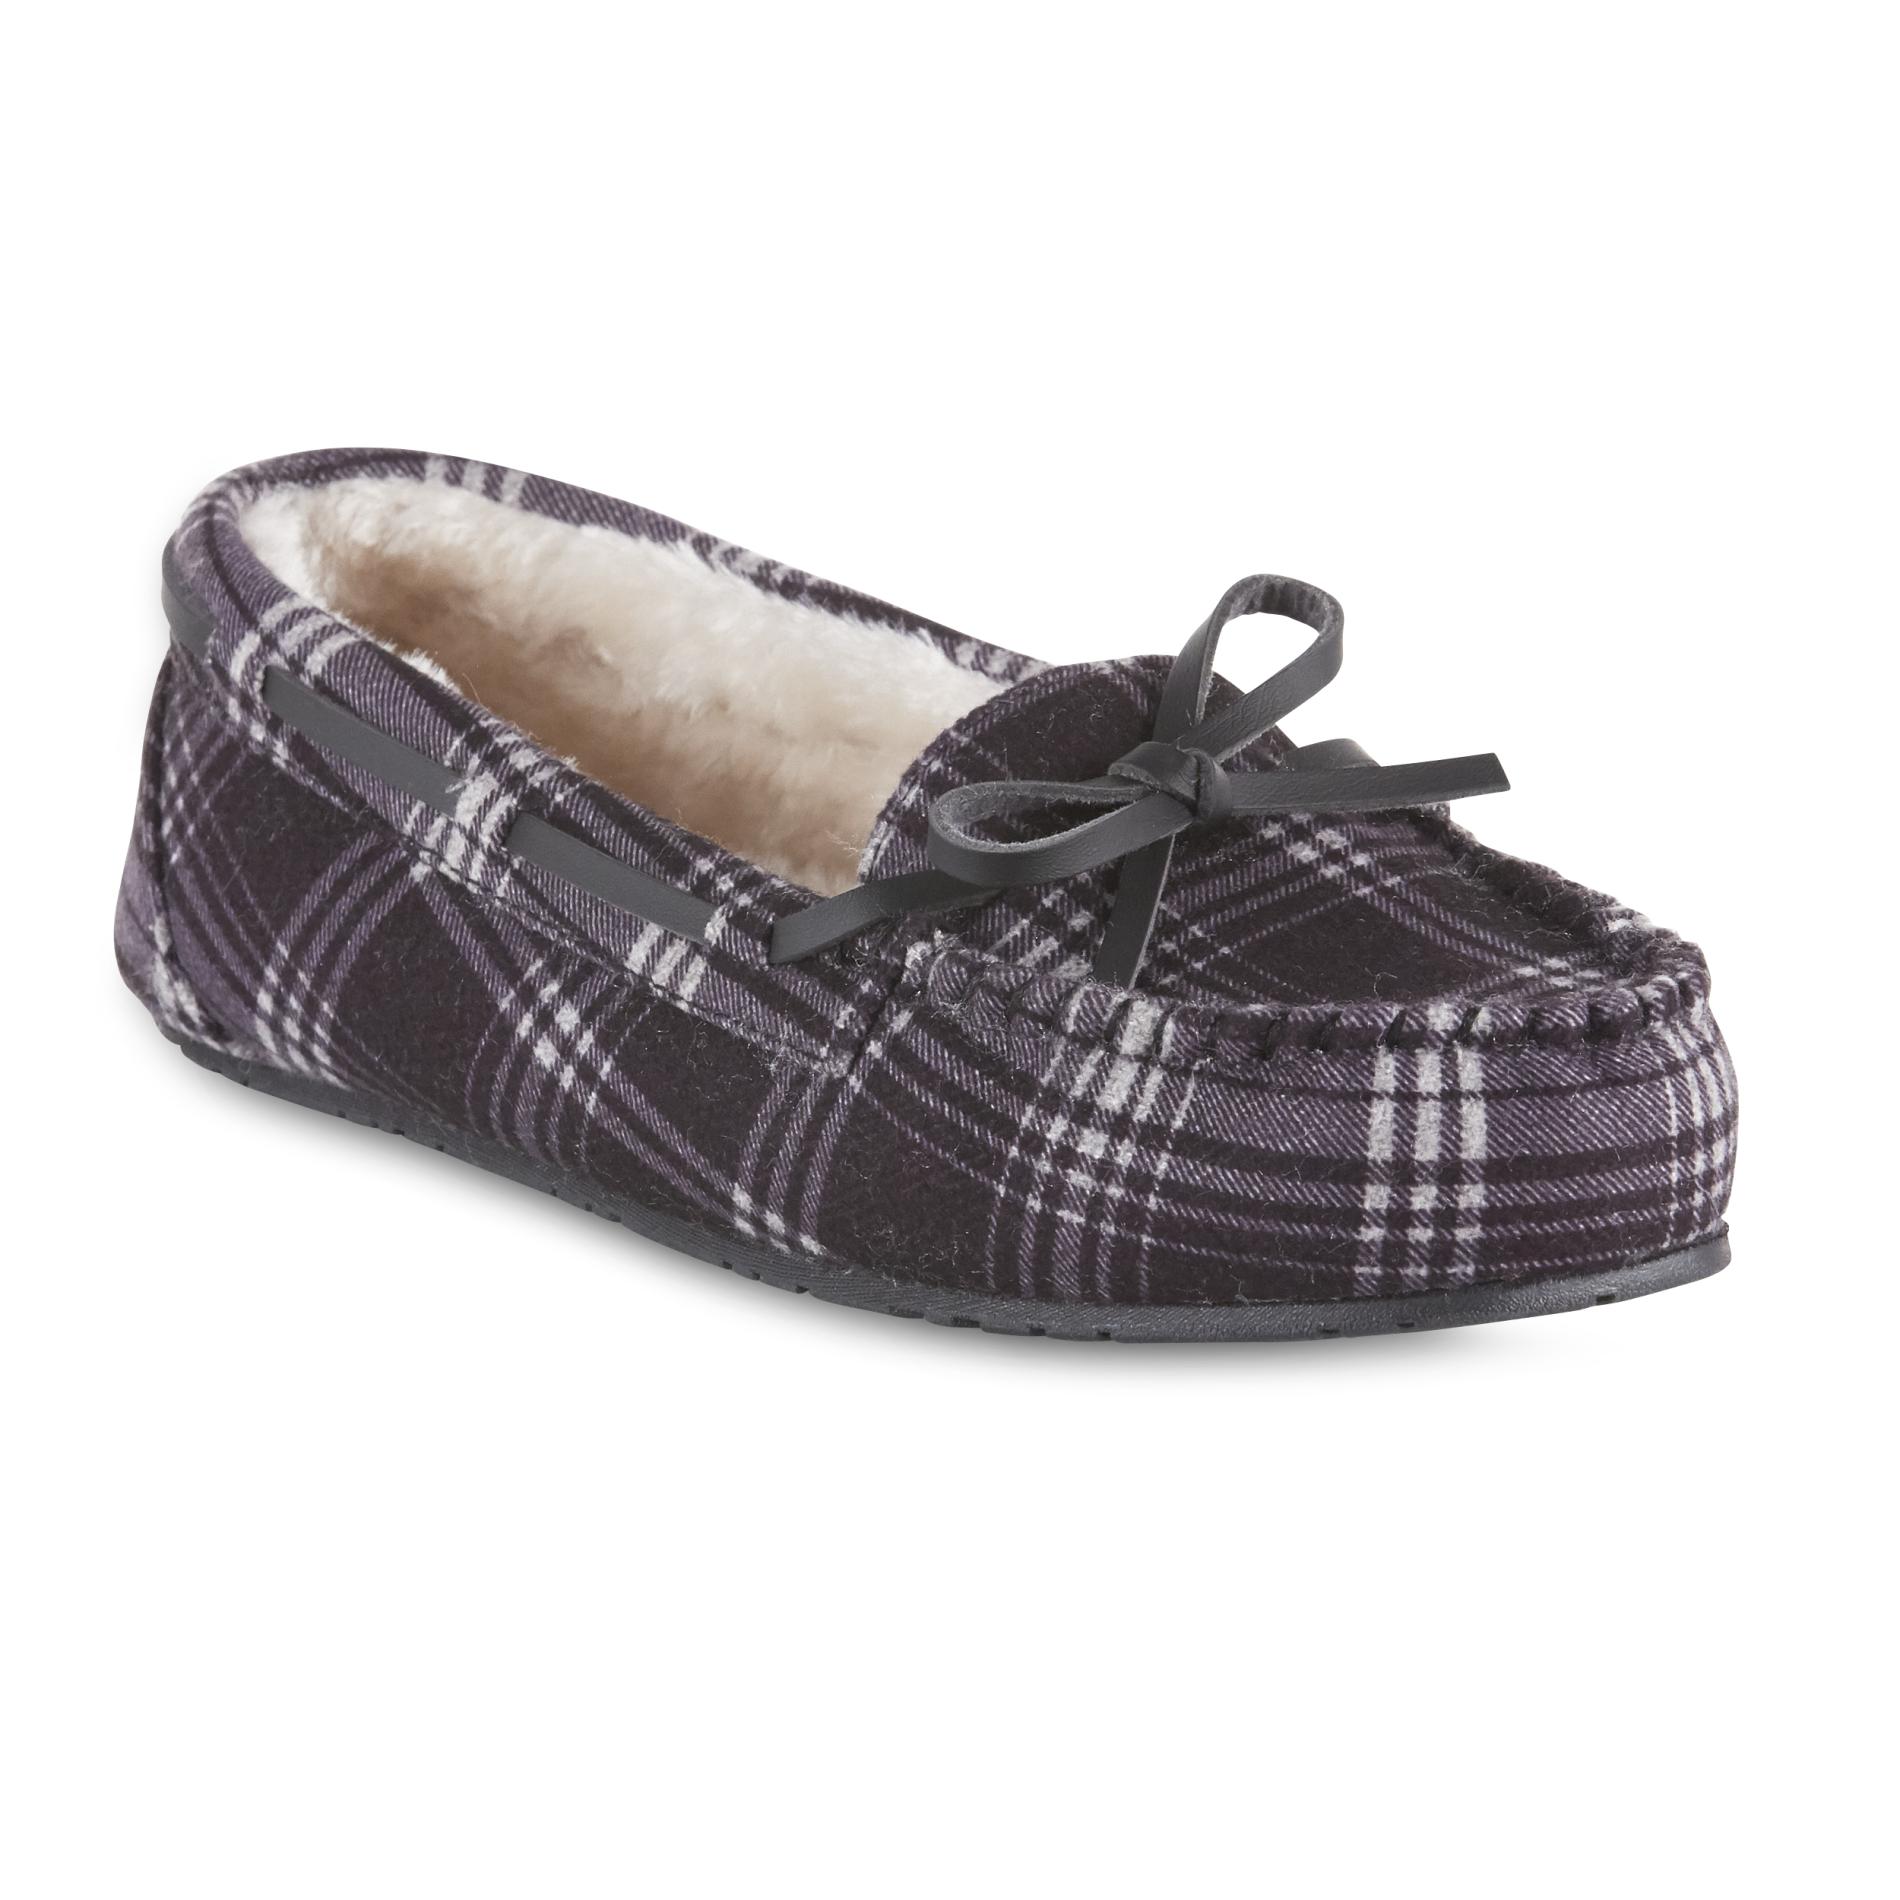 lucky brand moccasin slippers